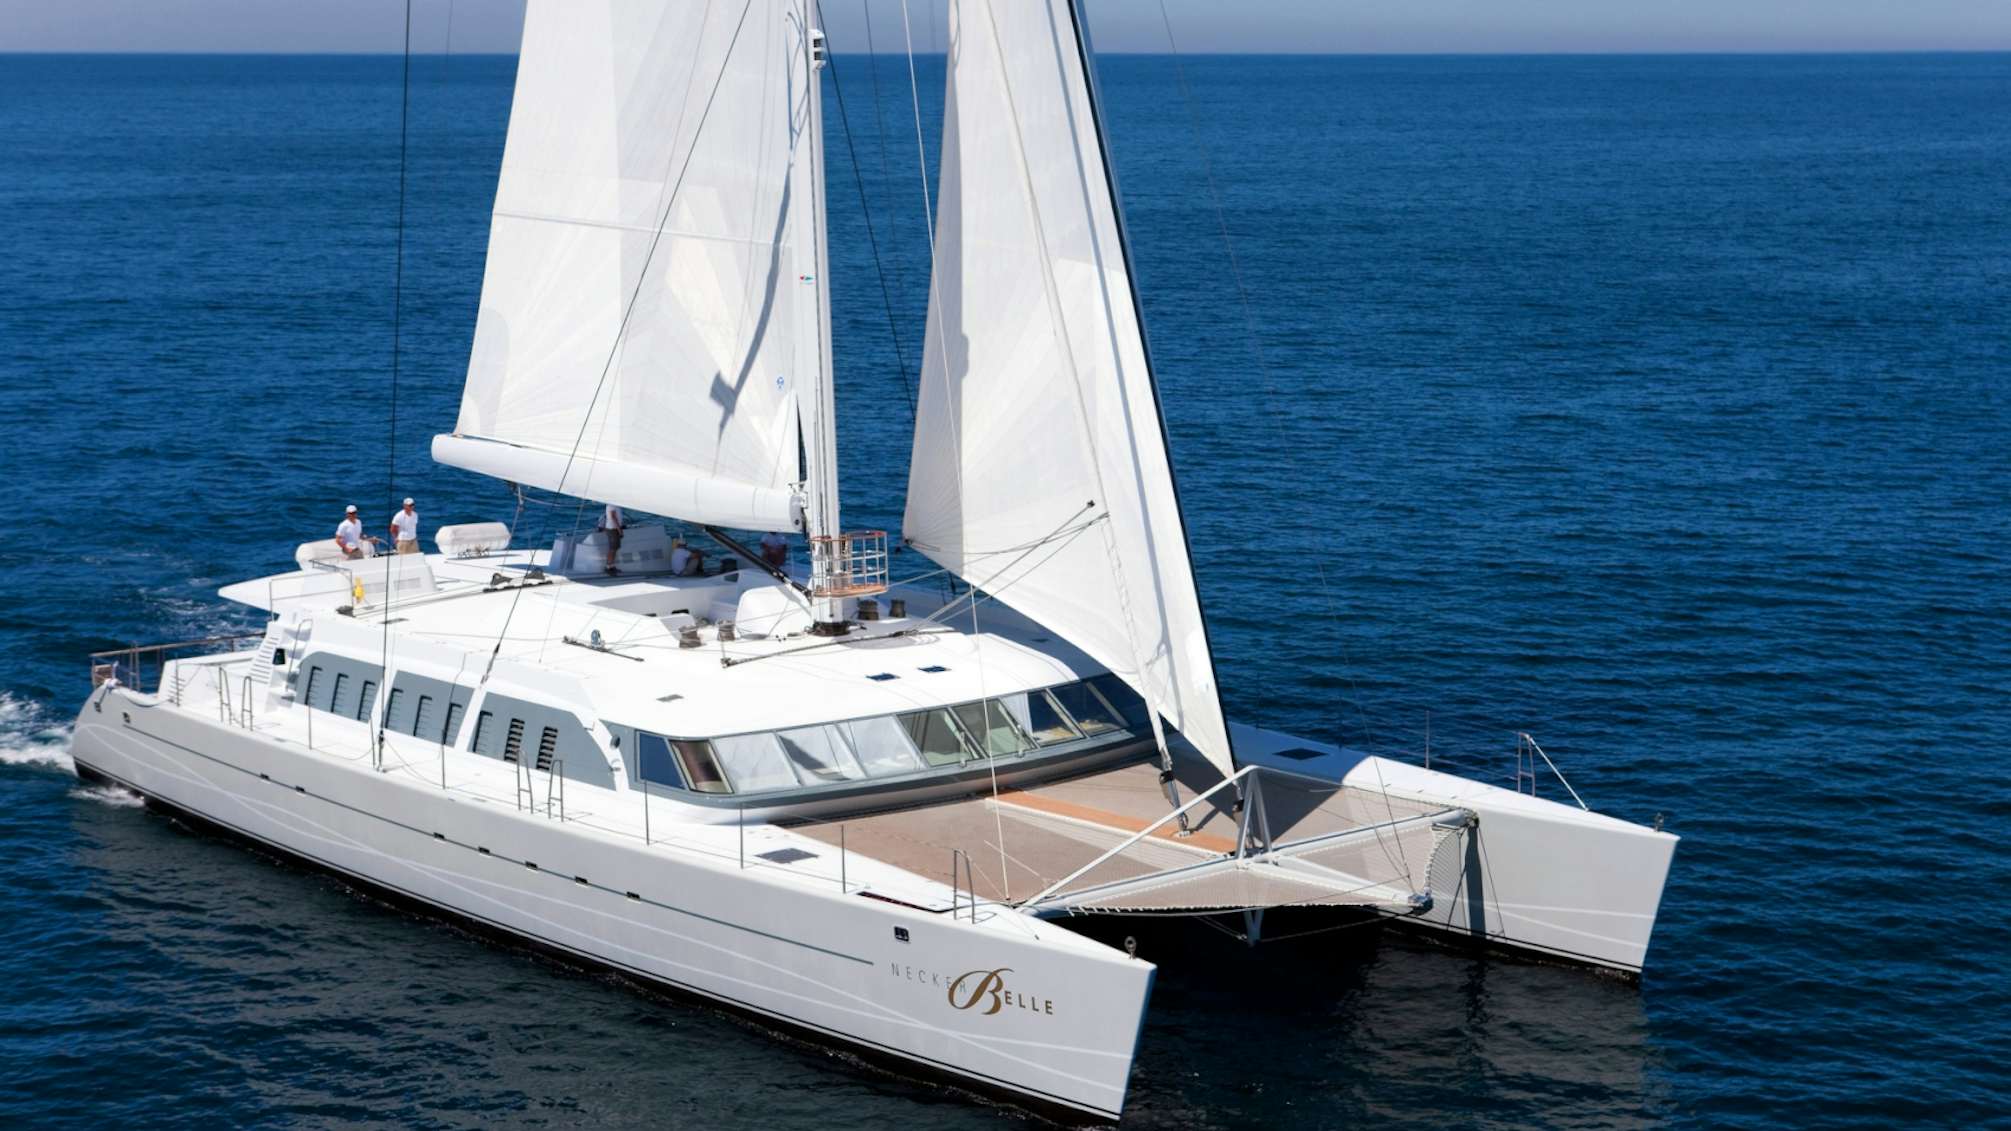 Watch Video for BELLA VITA Yacht for Charter